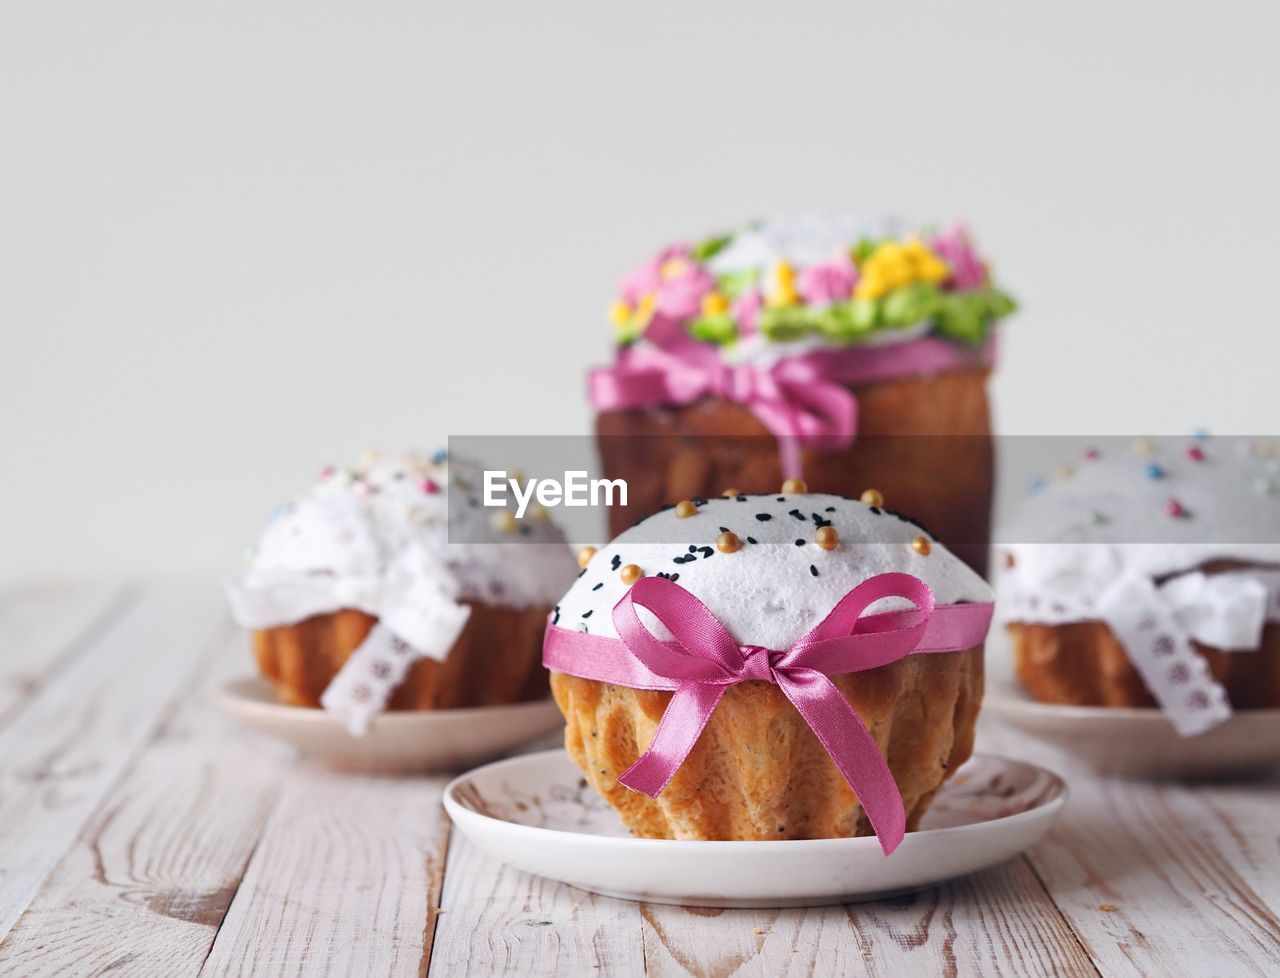 Easter pastries decorated with pastry sprinkles and ribbons on a white wooden background.